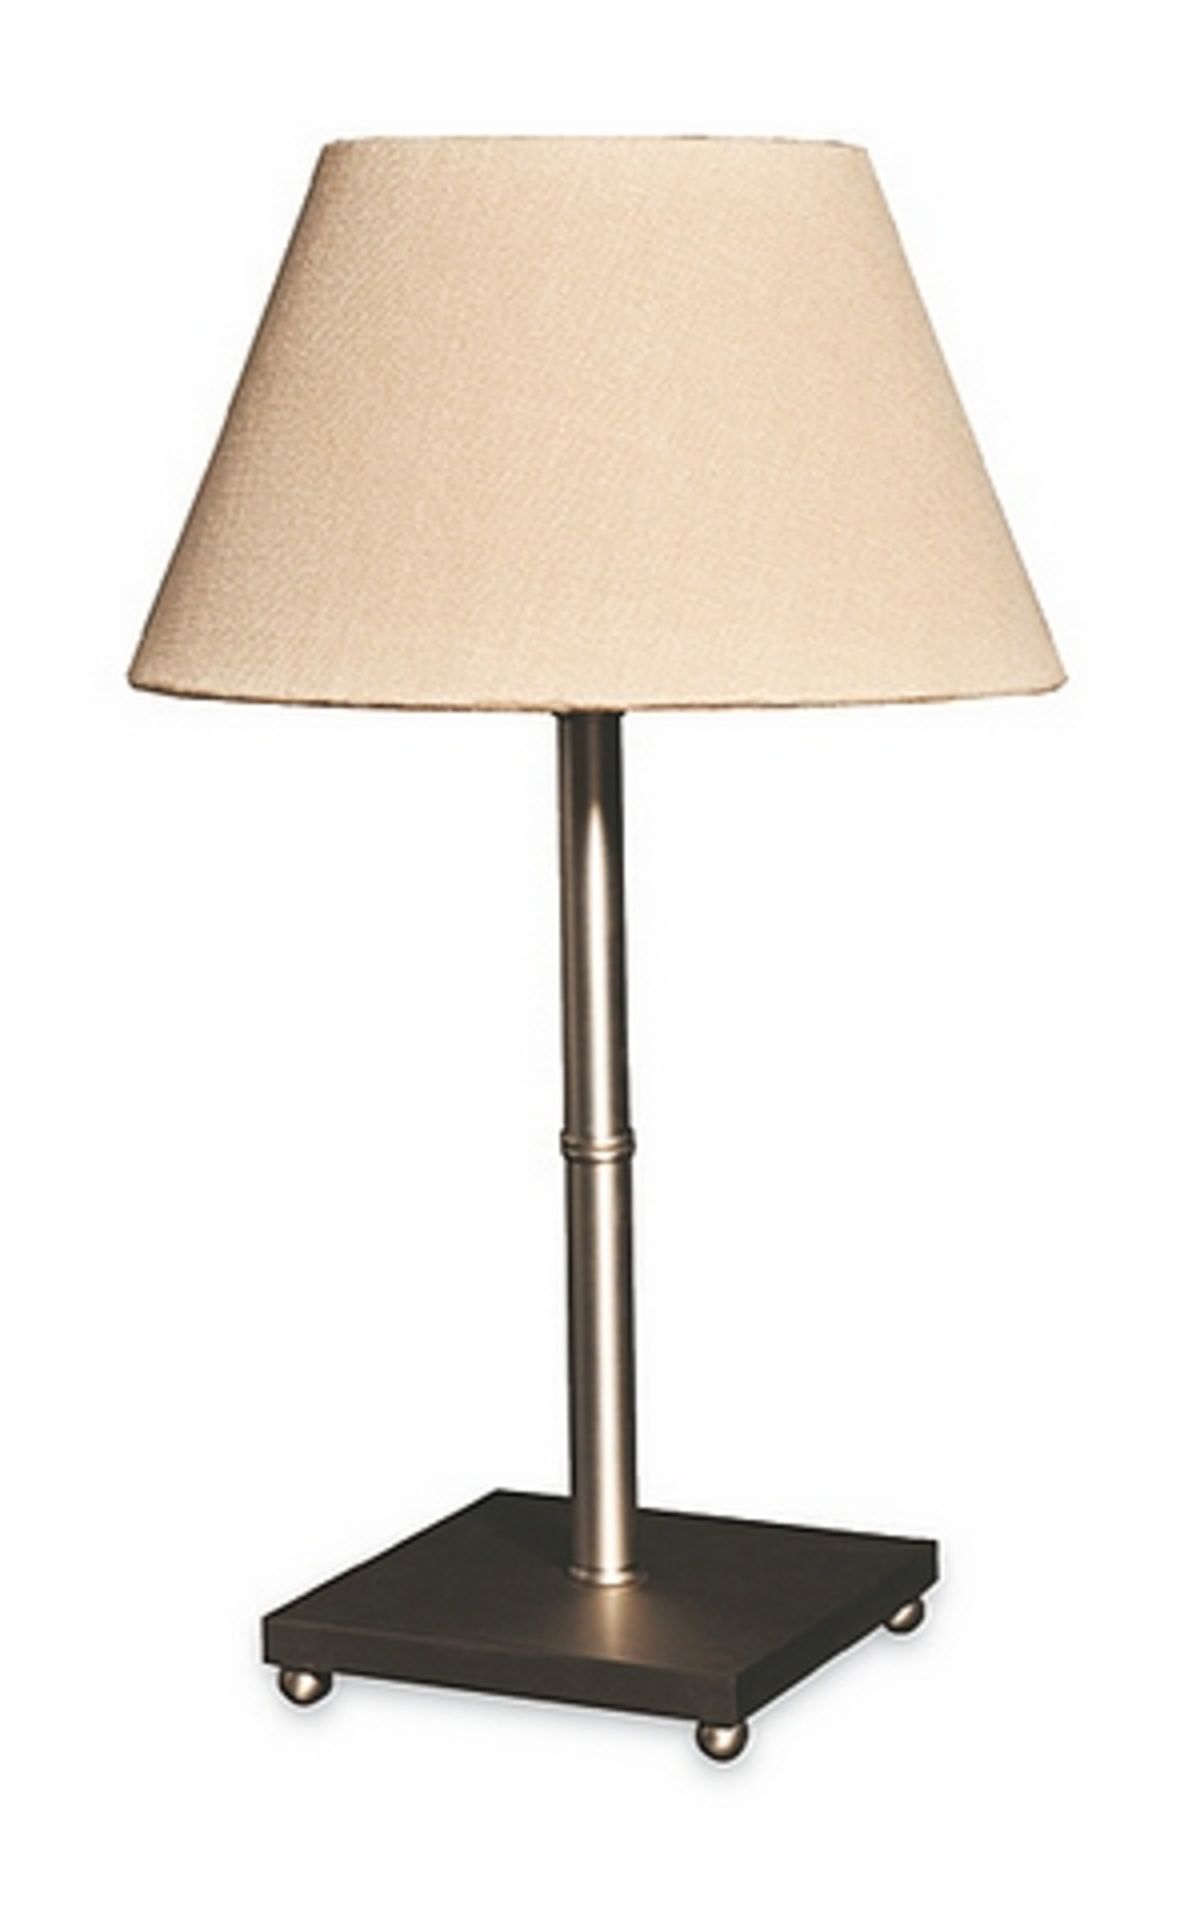 Oxford Table Lamp 33 X 33 X 60cm In A Clever Collaboration The University Of Oxford Has Teamed Up